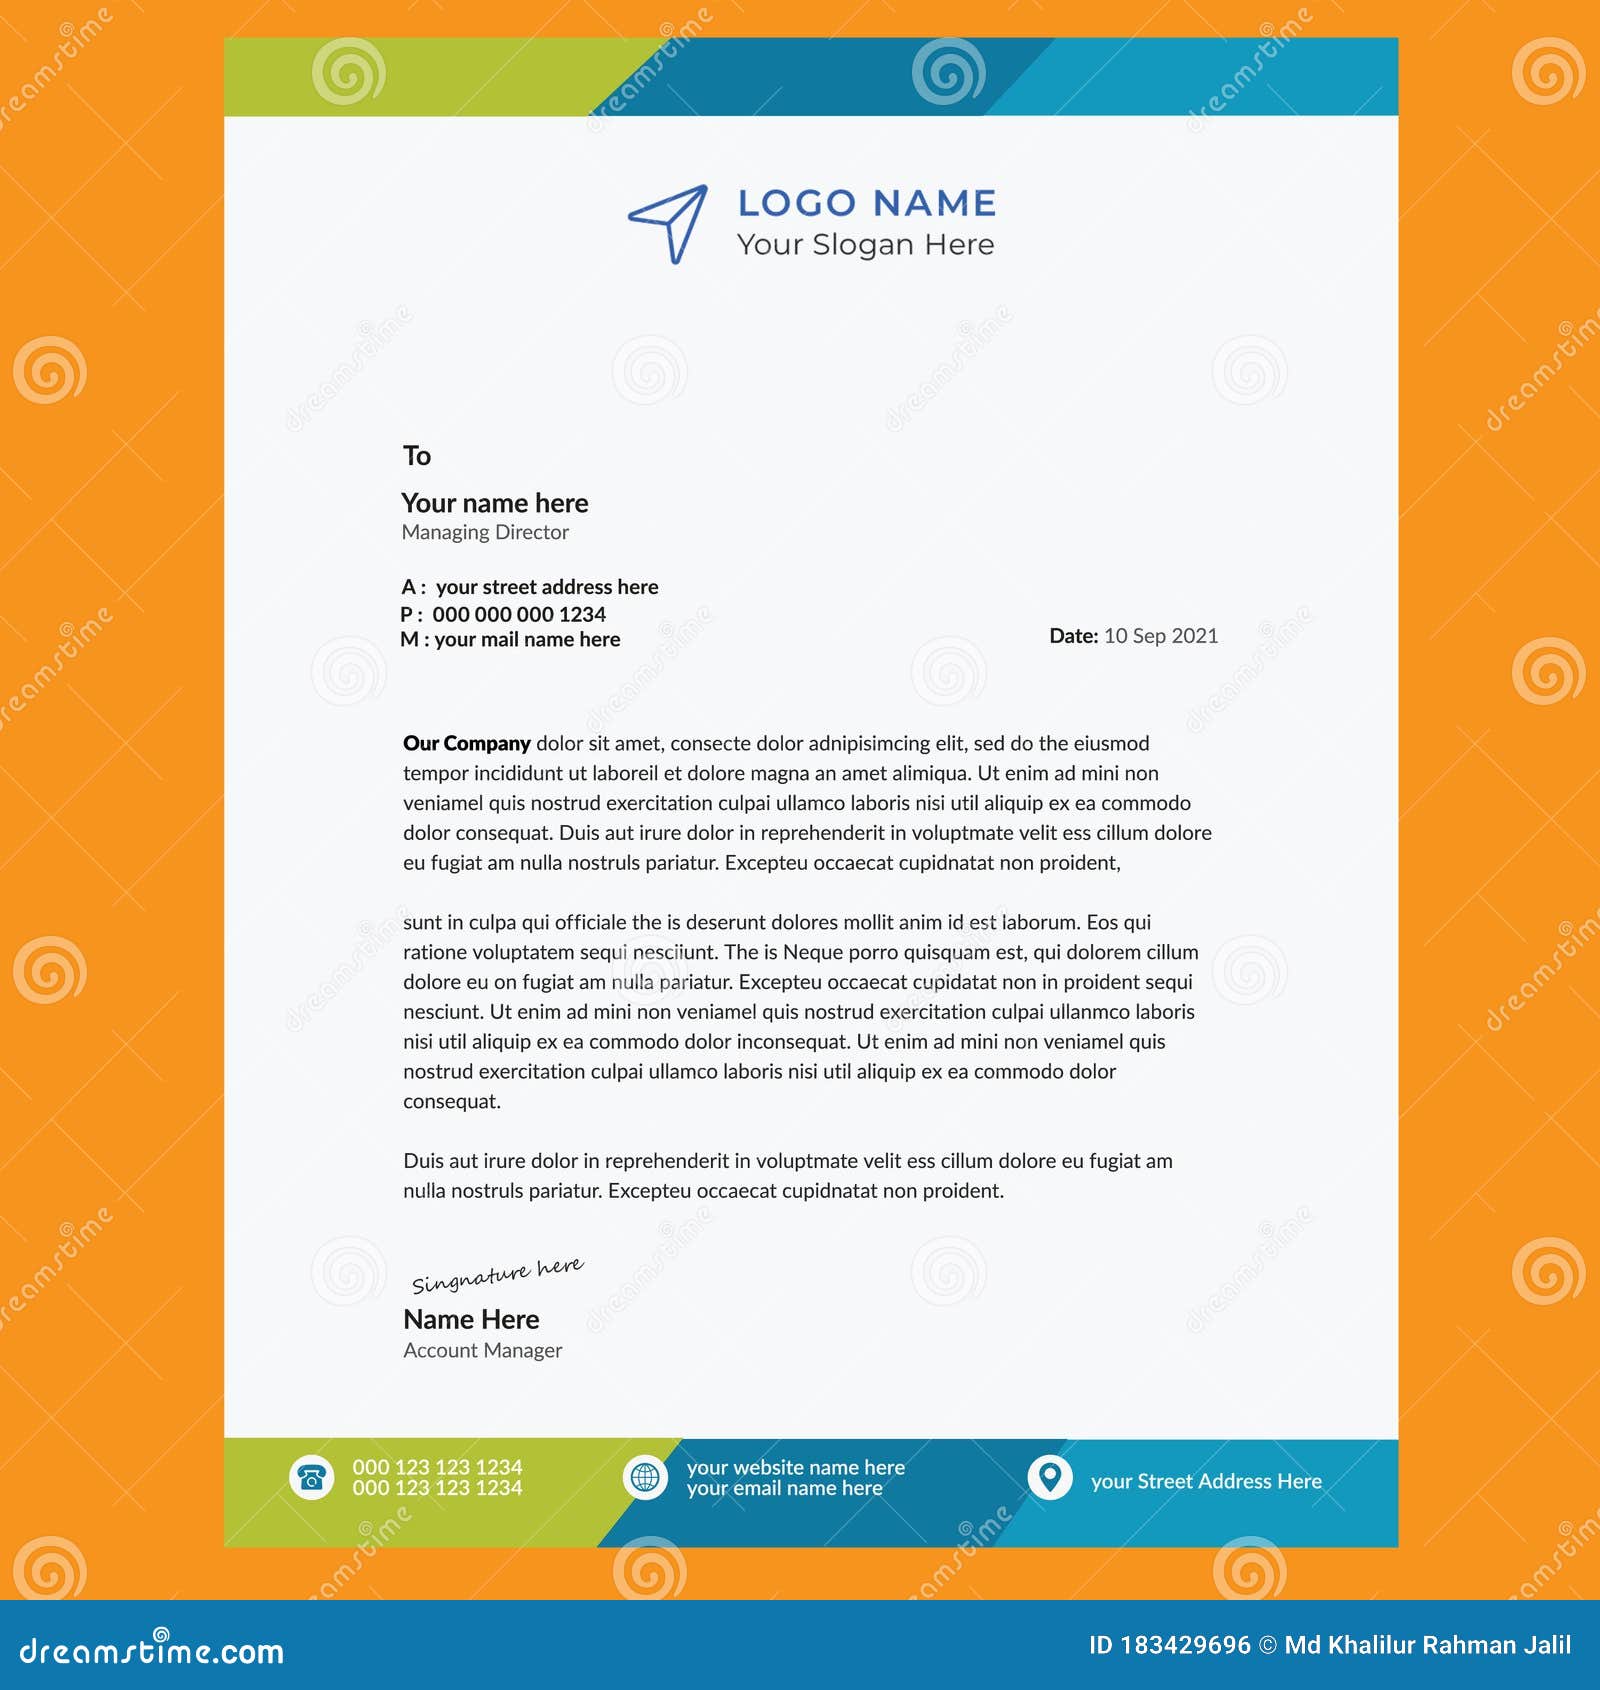 Professional Business Letter Template from thumbs.dreamstime.com